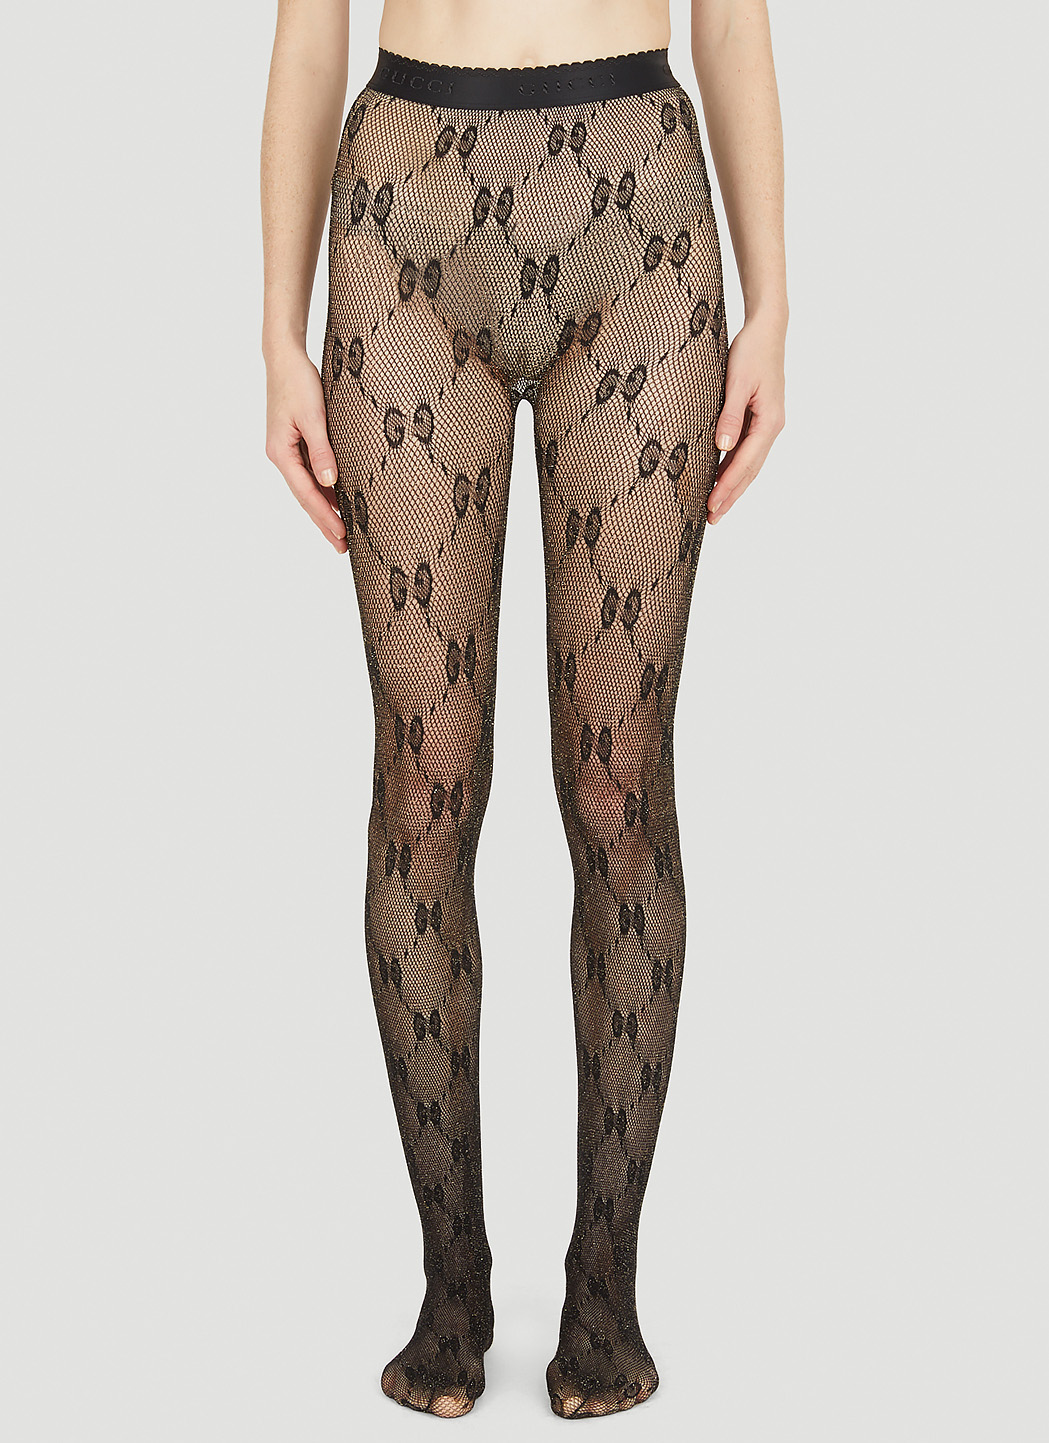 Buy Gucci Black High-rise Leggings in Technical Jersey for Women